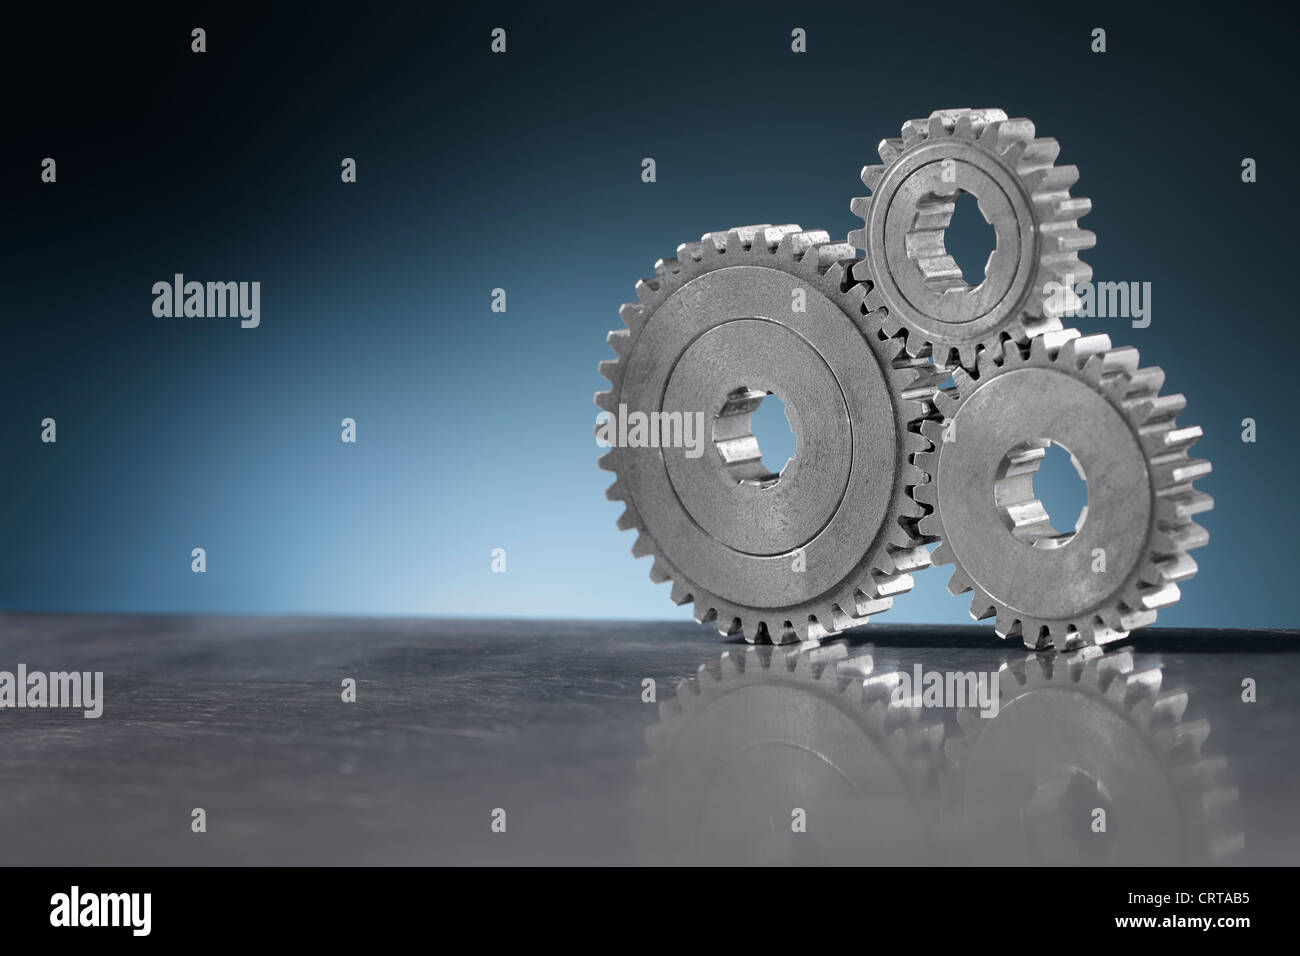 Still life with Old metallic cog gear wheels. Stock Photo